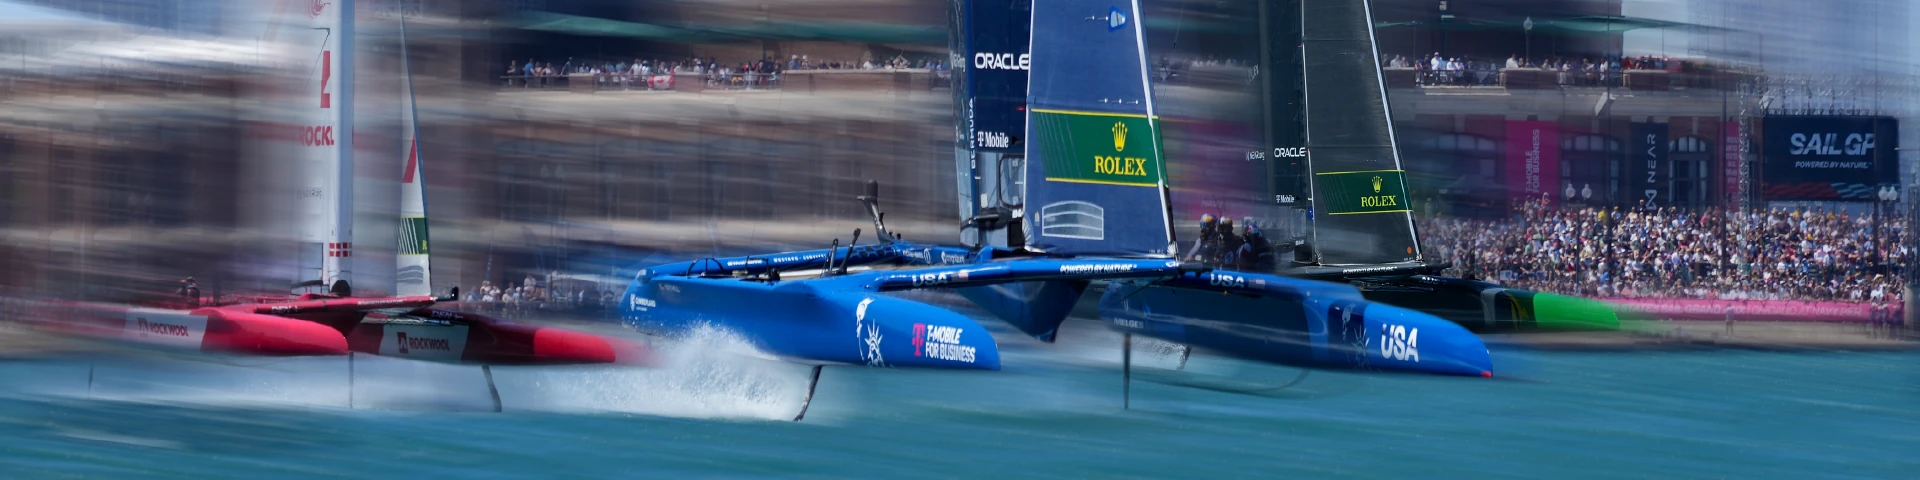 Rolex United States Sail Grand Prix Chicago at Navy Pier Information, Tickets, Live Stream and Broadcast Details SailGP